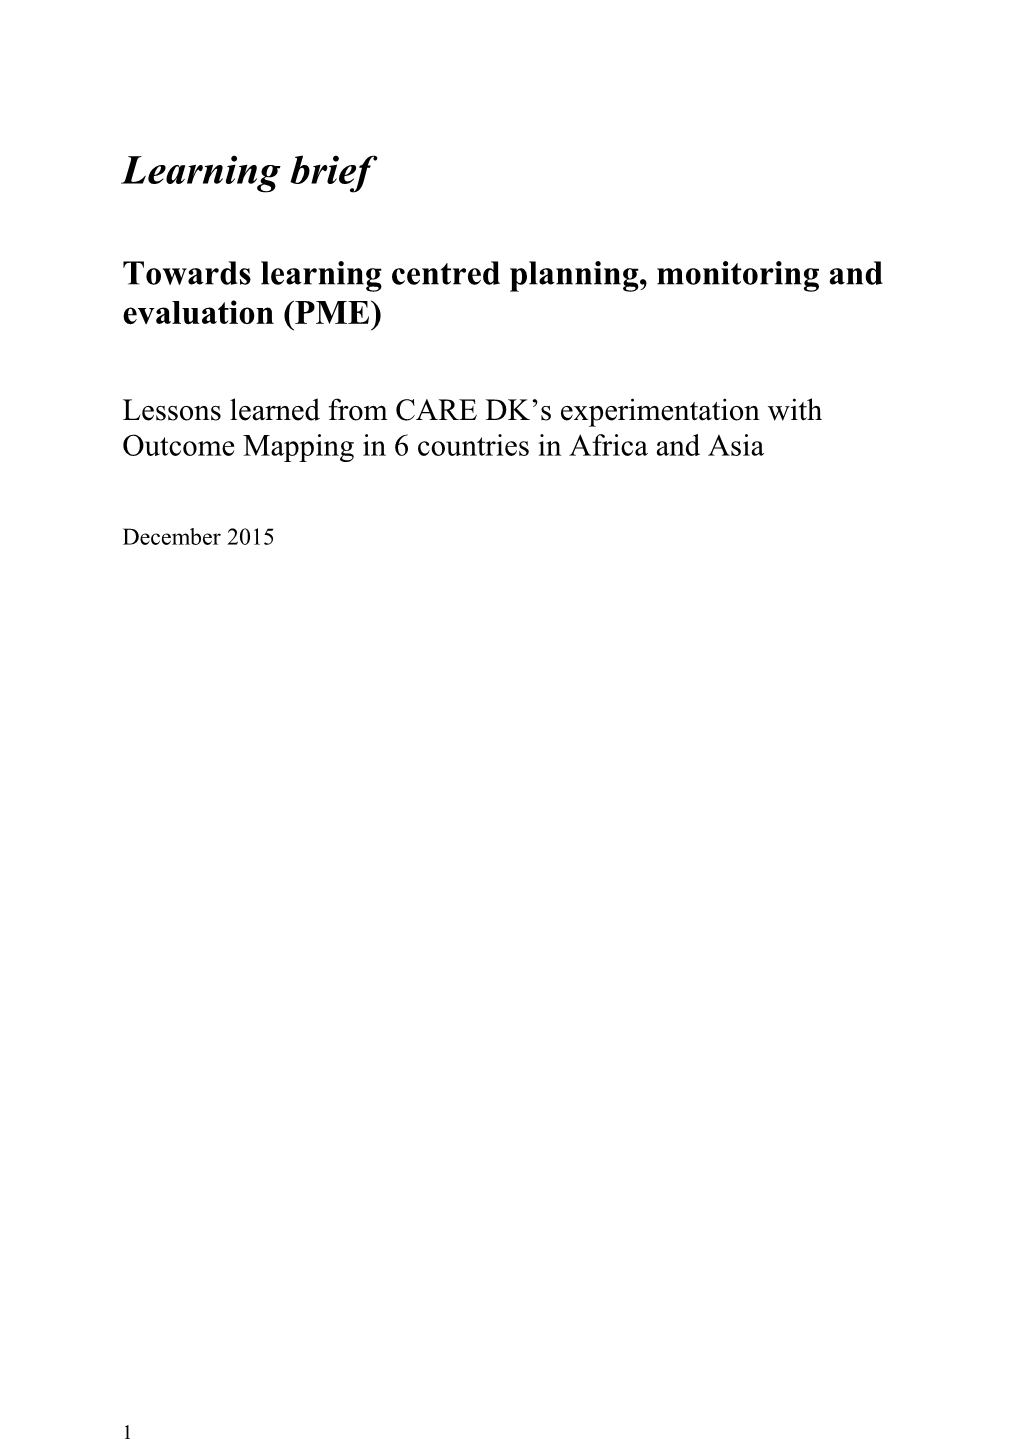 Towards Learning Centred Planning, Monitoring and Evaluation(PME)